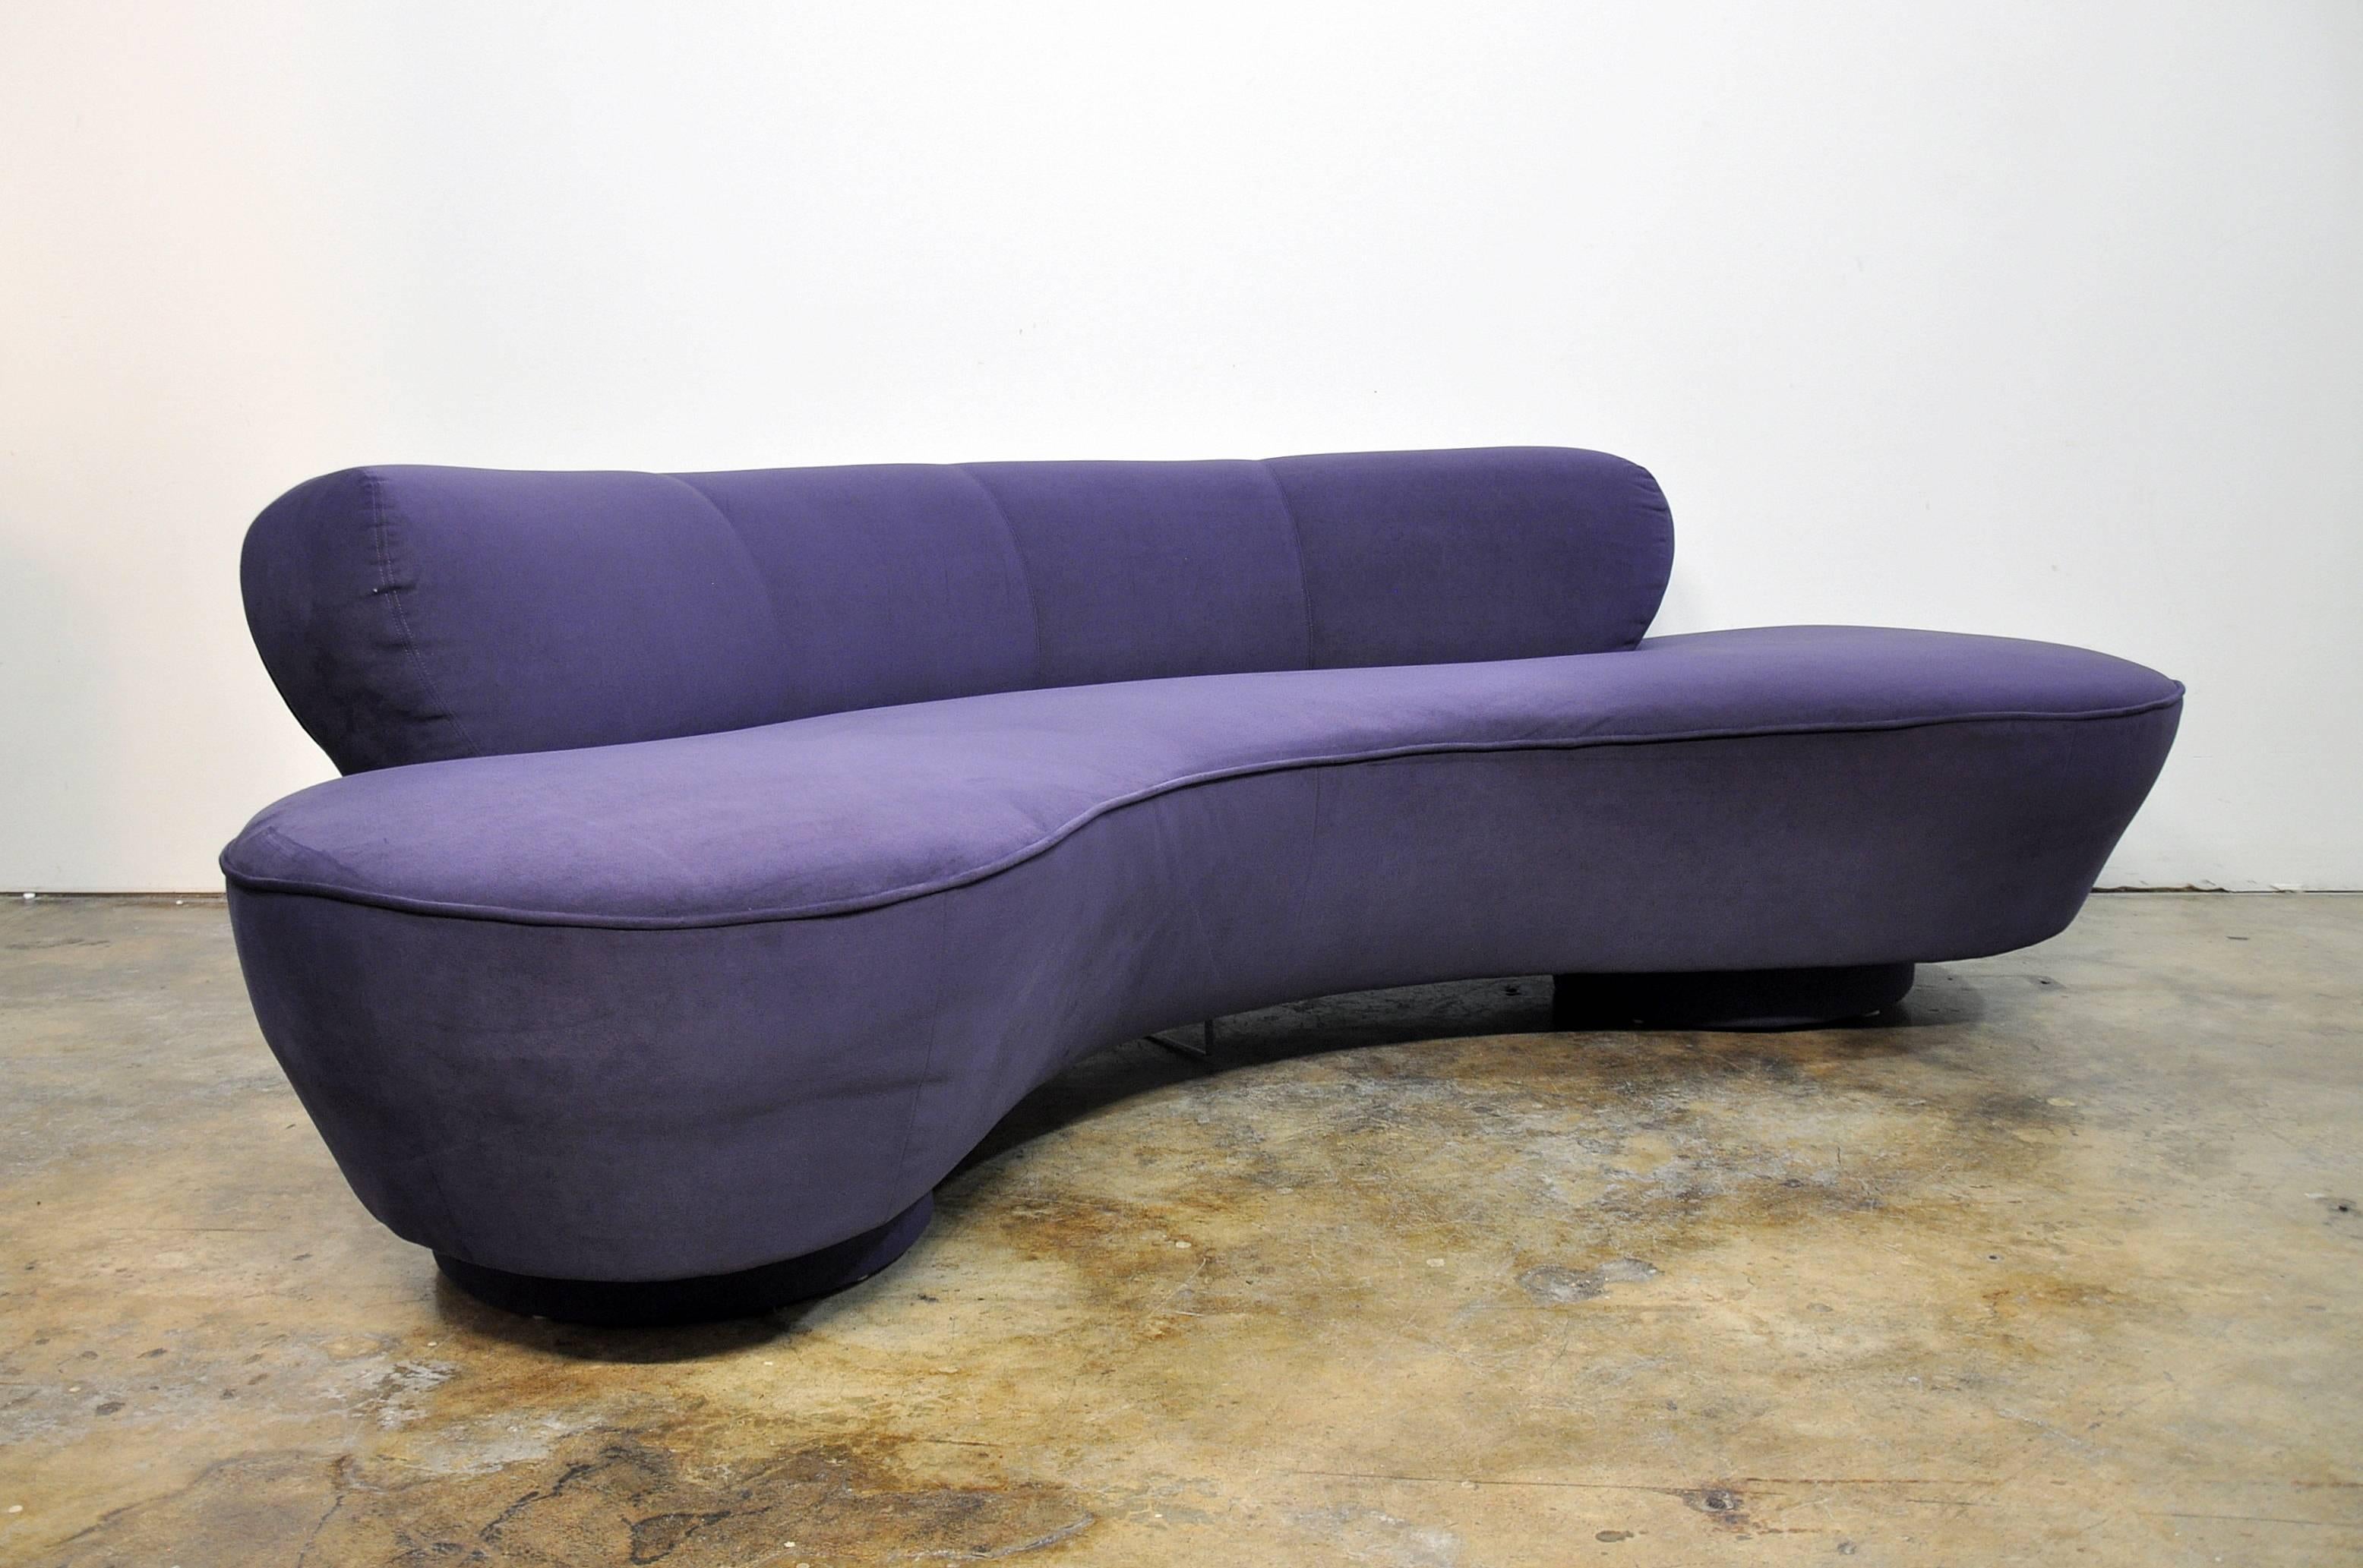 Iconic biomorphic sofa in original eggplant ultra-suede. Features a kidney or cloud shape with round upholstered bases and Lucite fin. The deep purple suede fabric is very soft to the touch. This timeless Classic is a one owner beauty that will